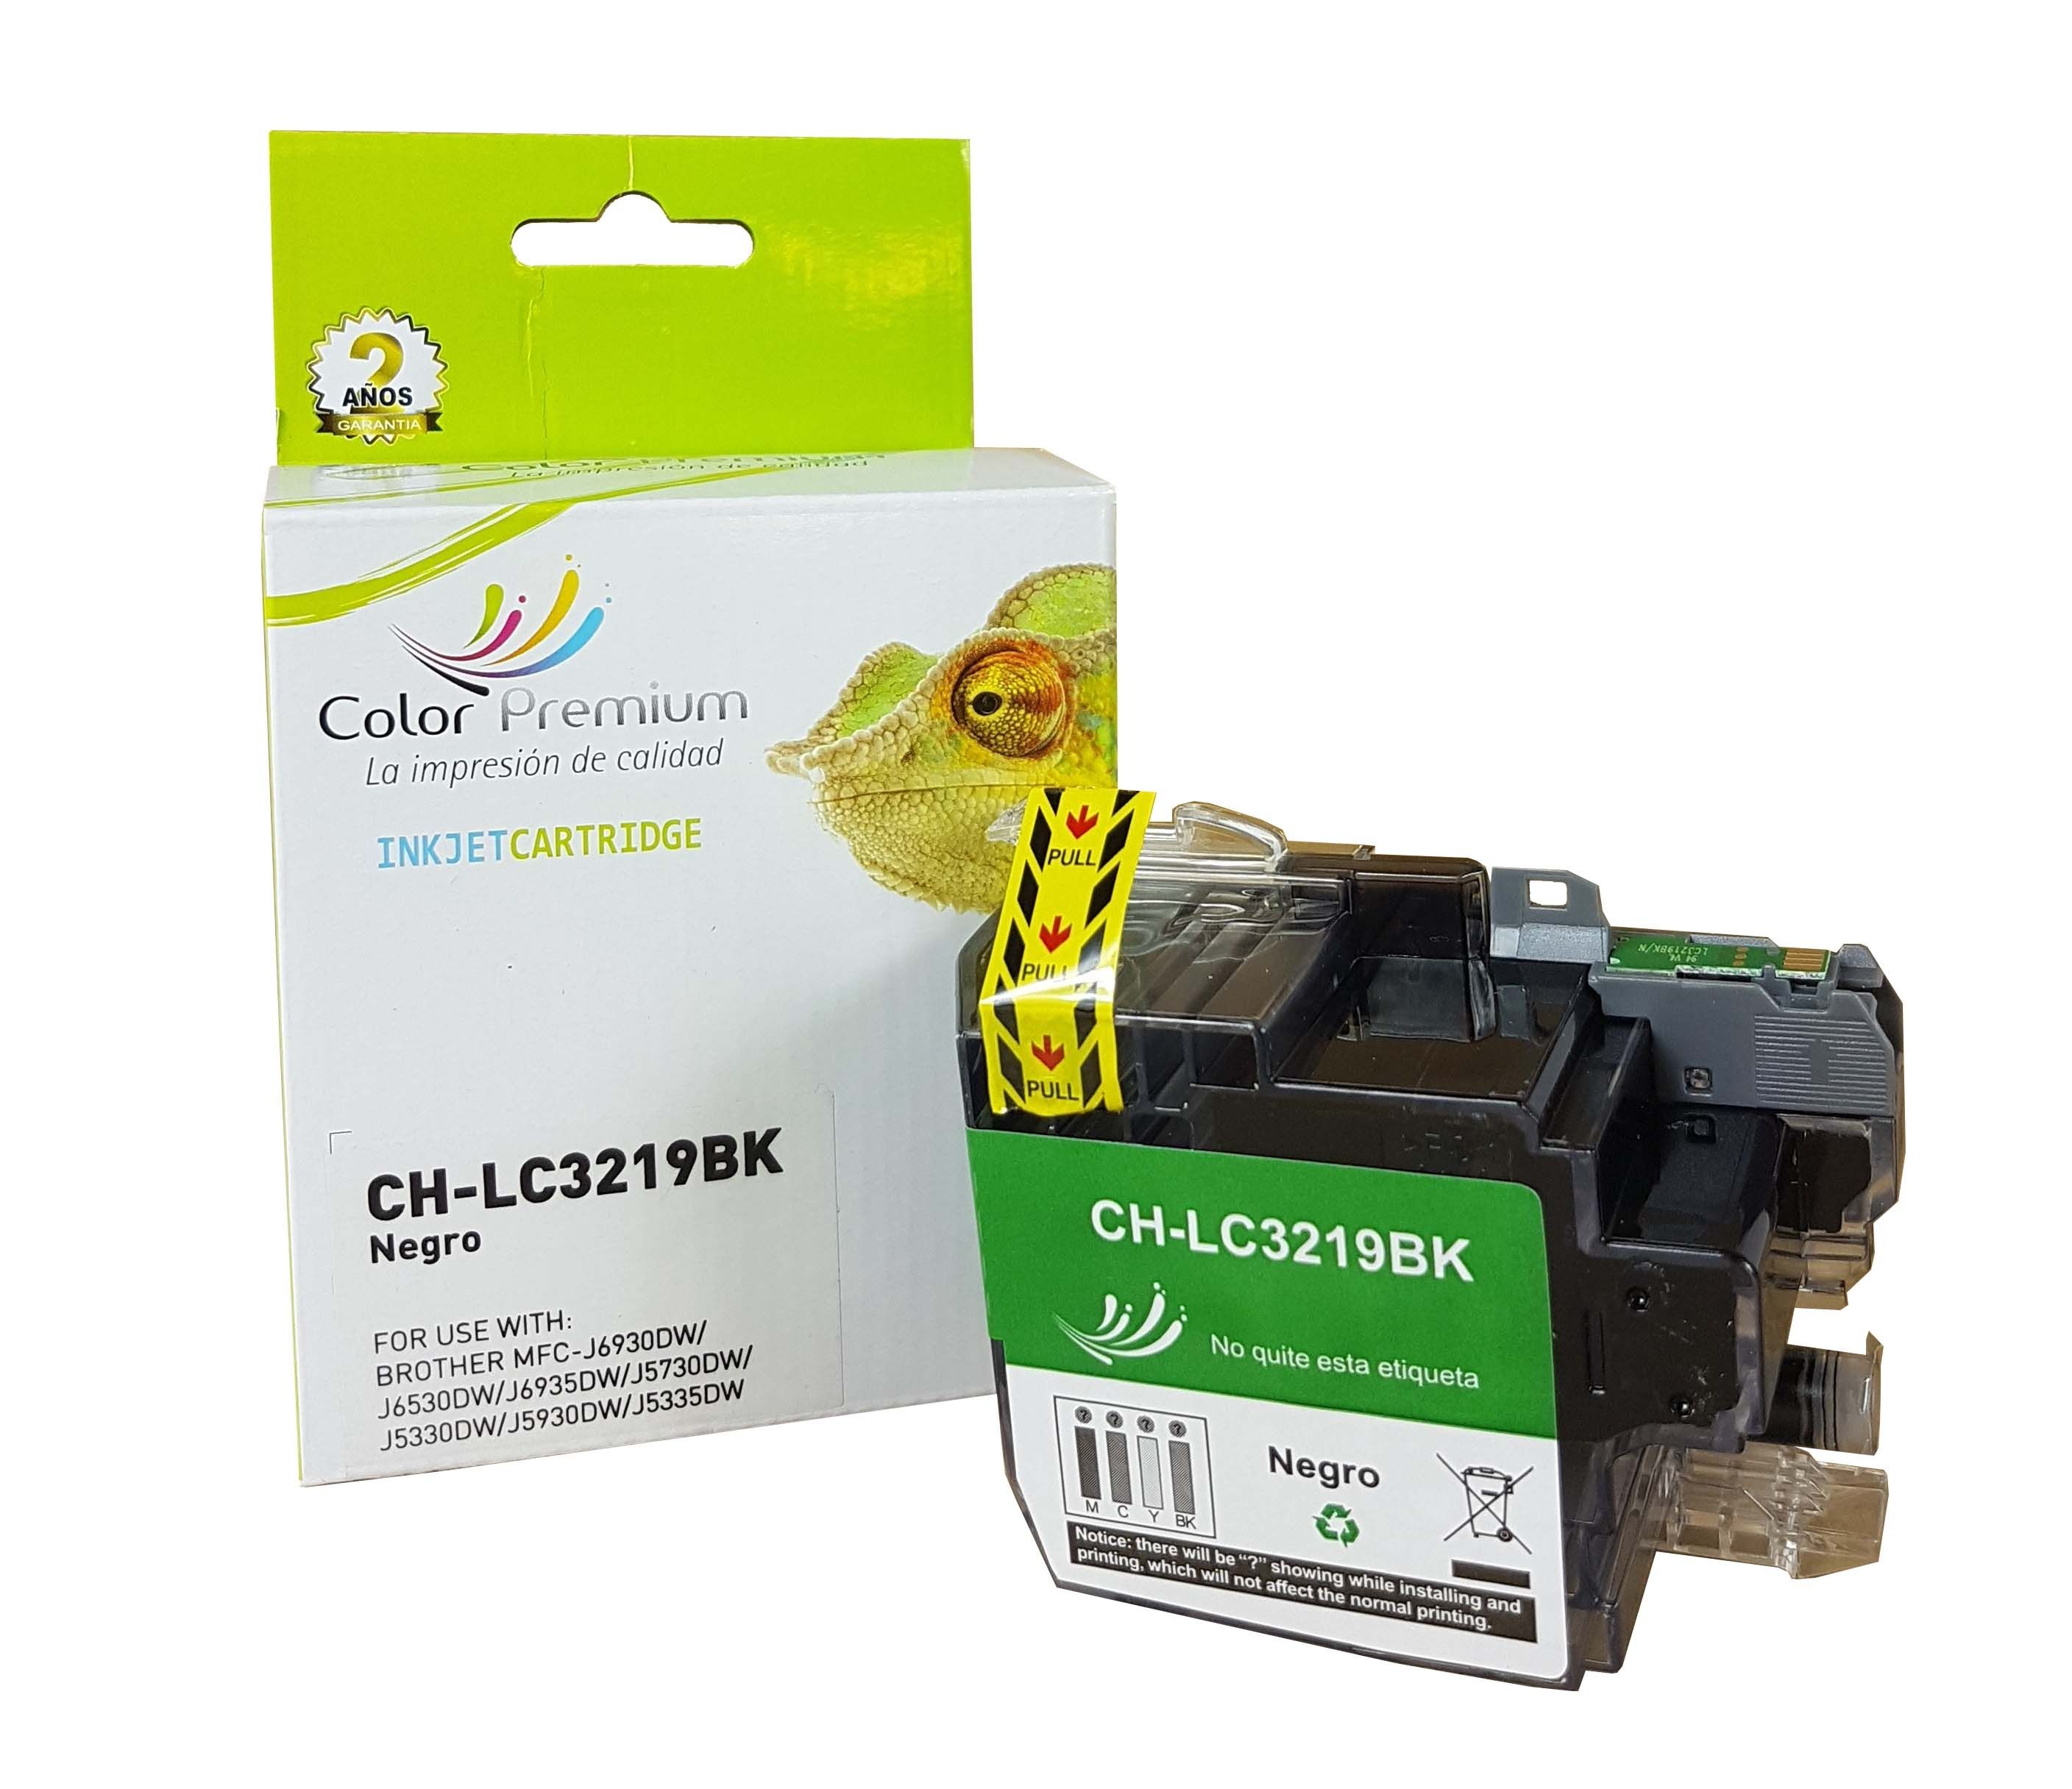 Big pack inkjet Brother LC3219XL on